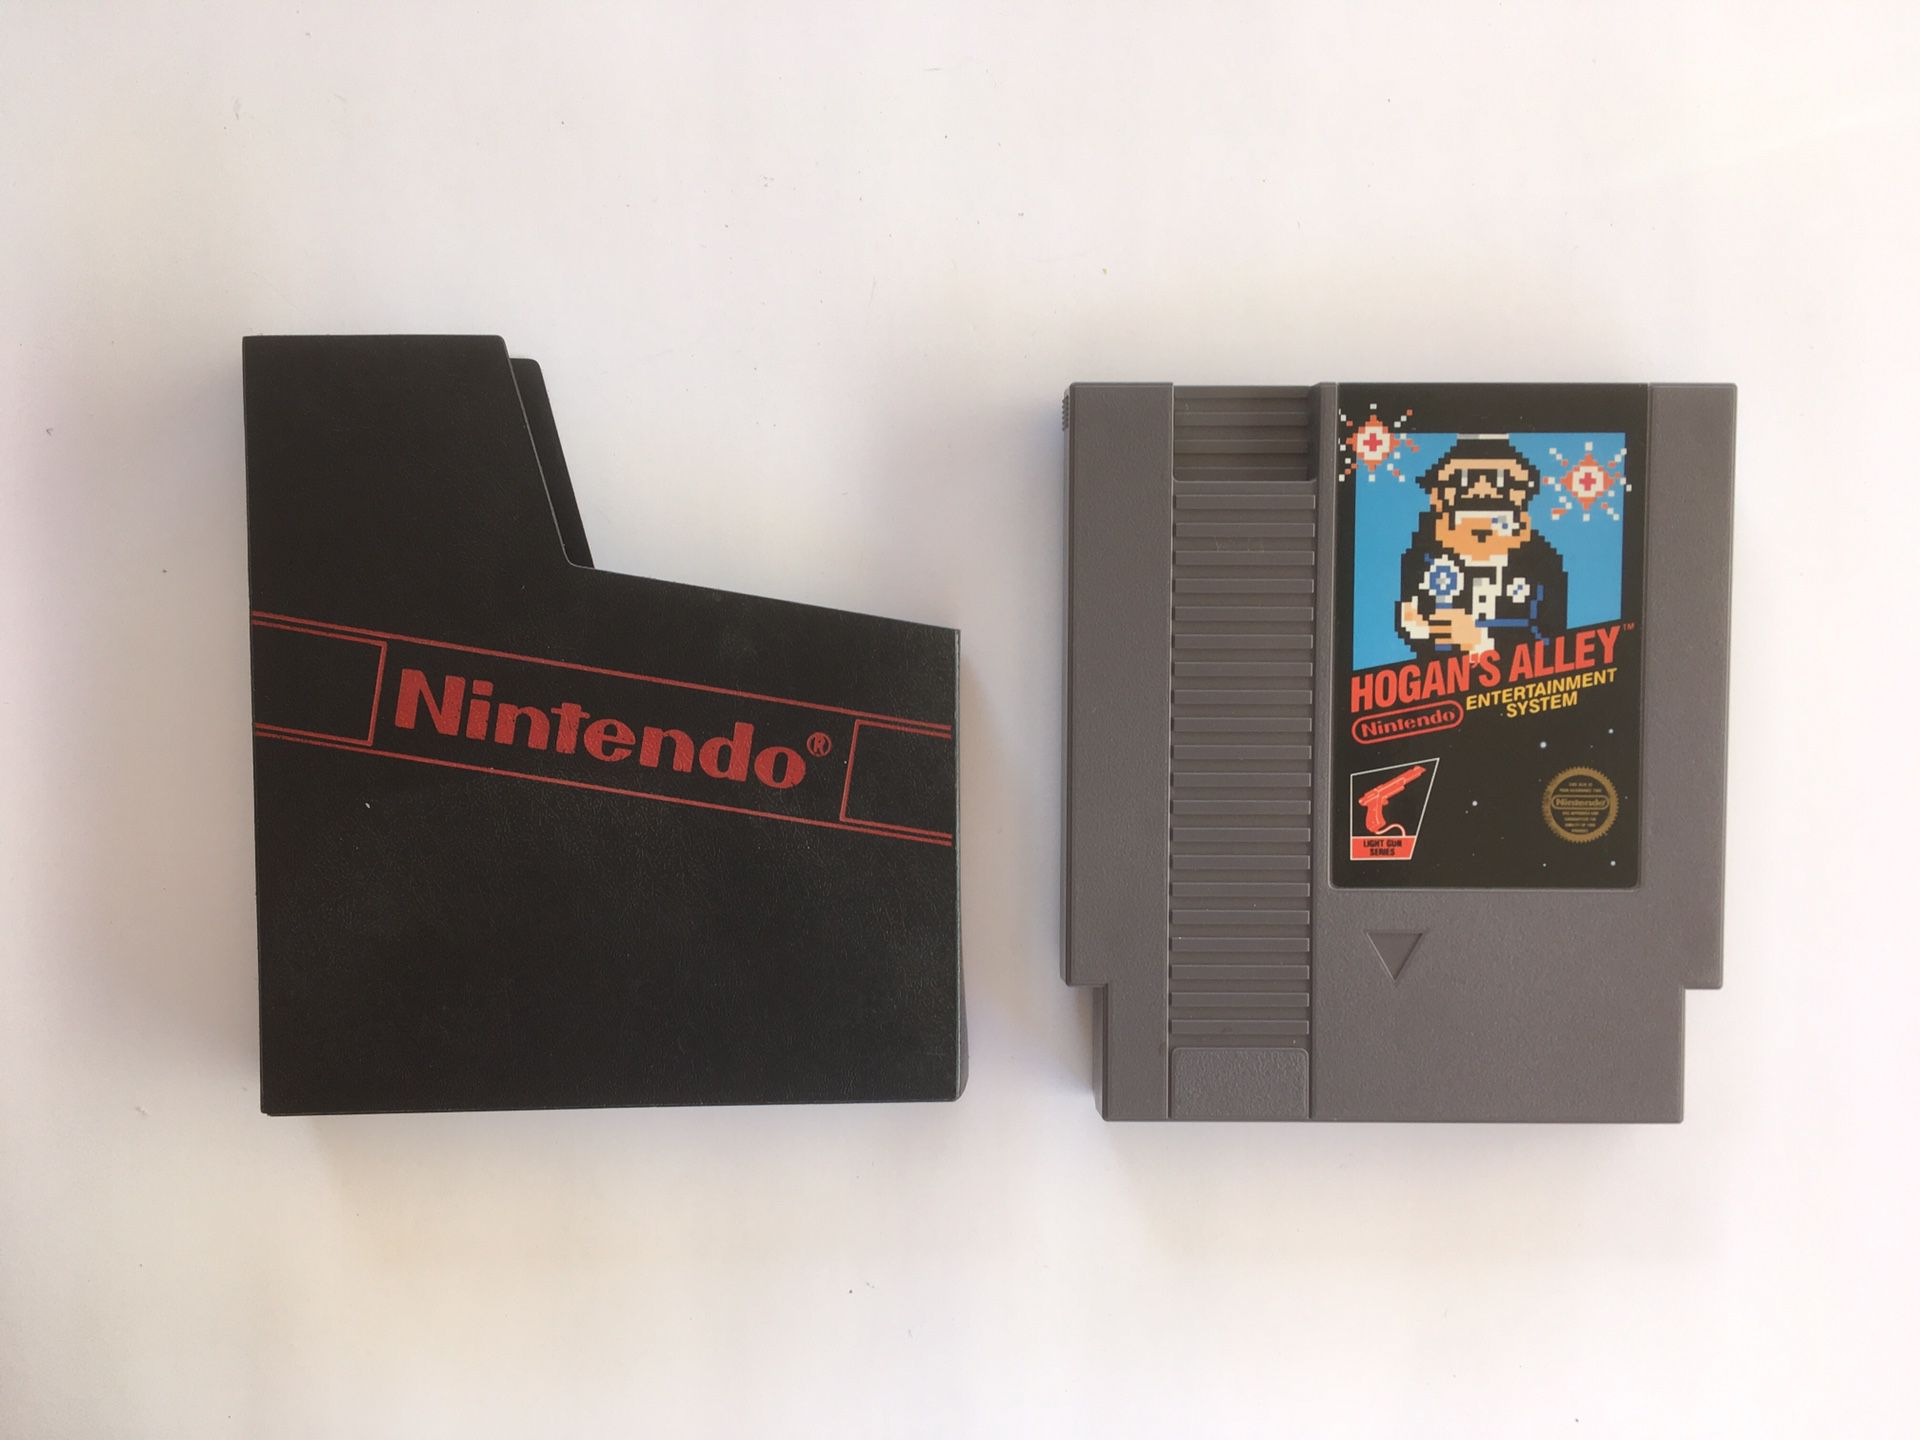 Hogan’s alley for nes